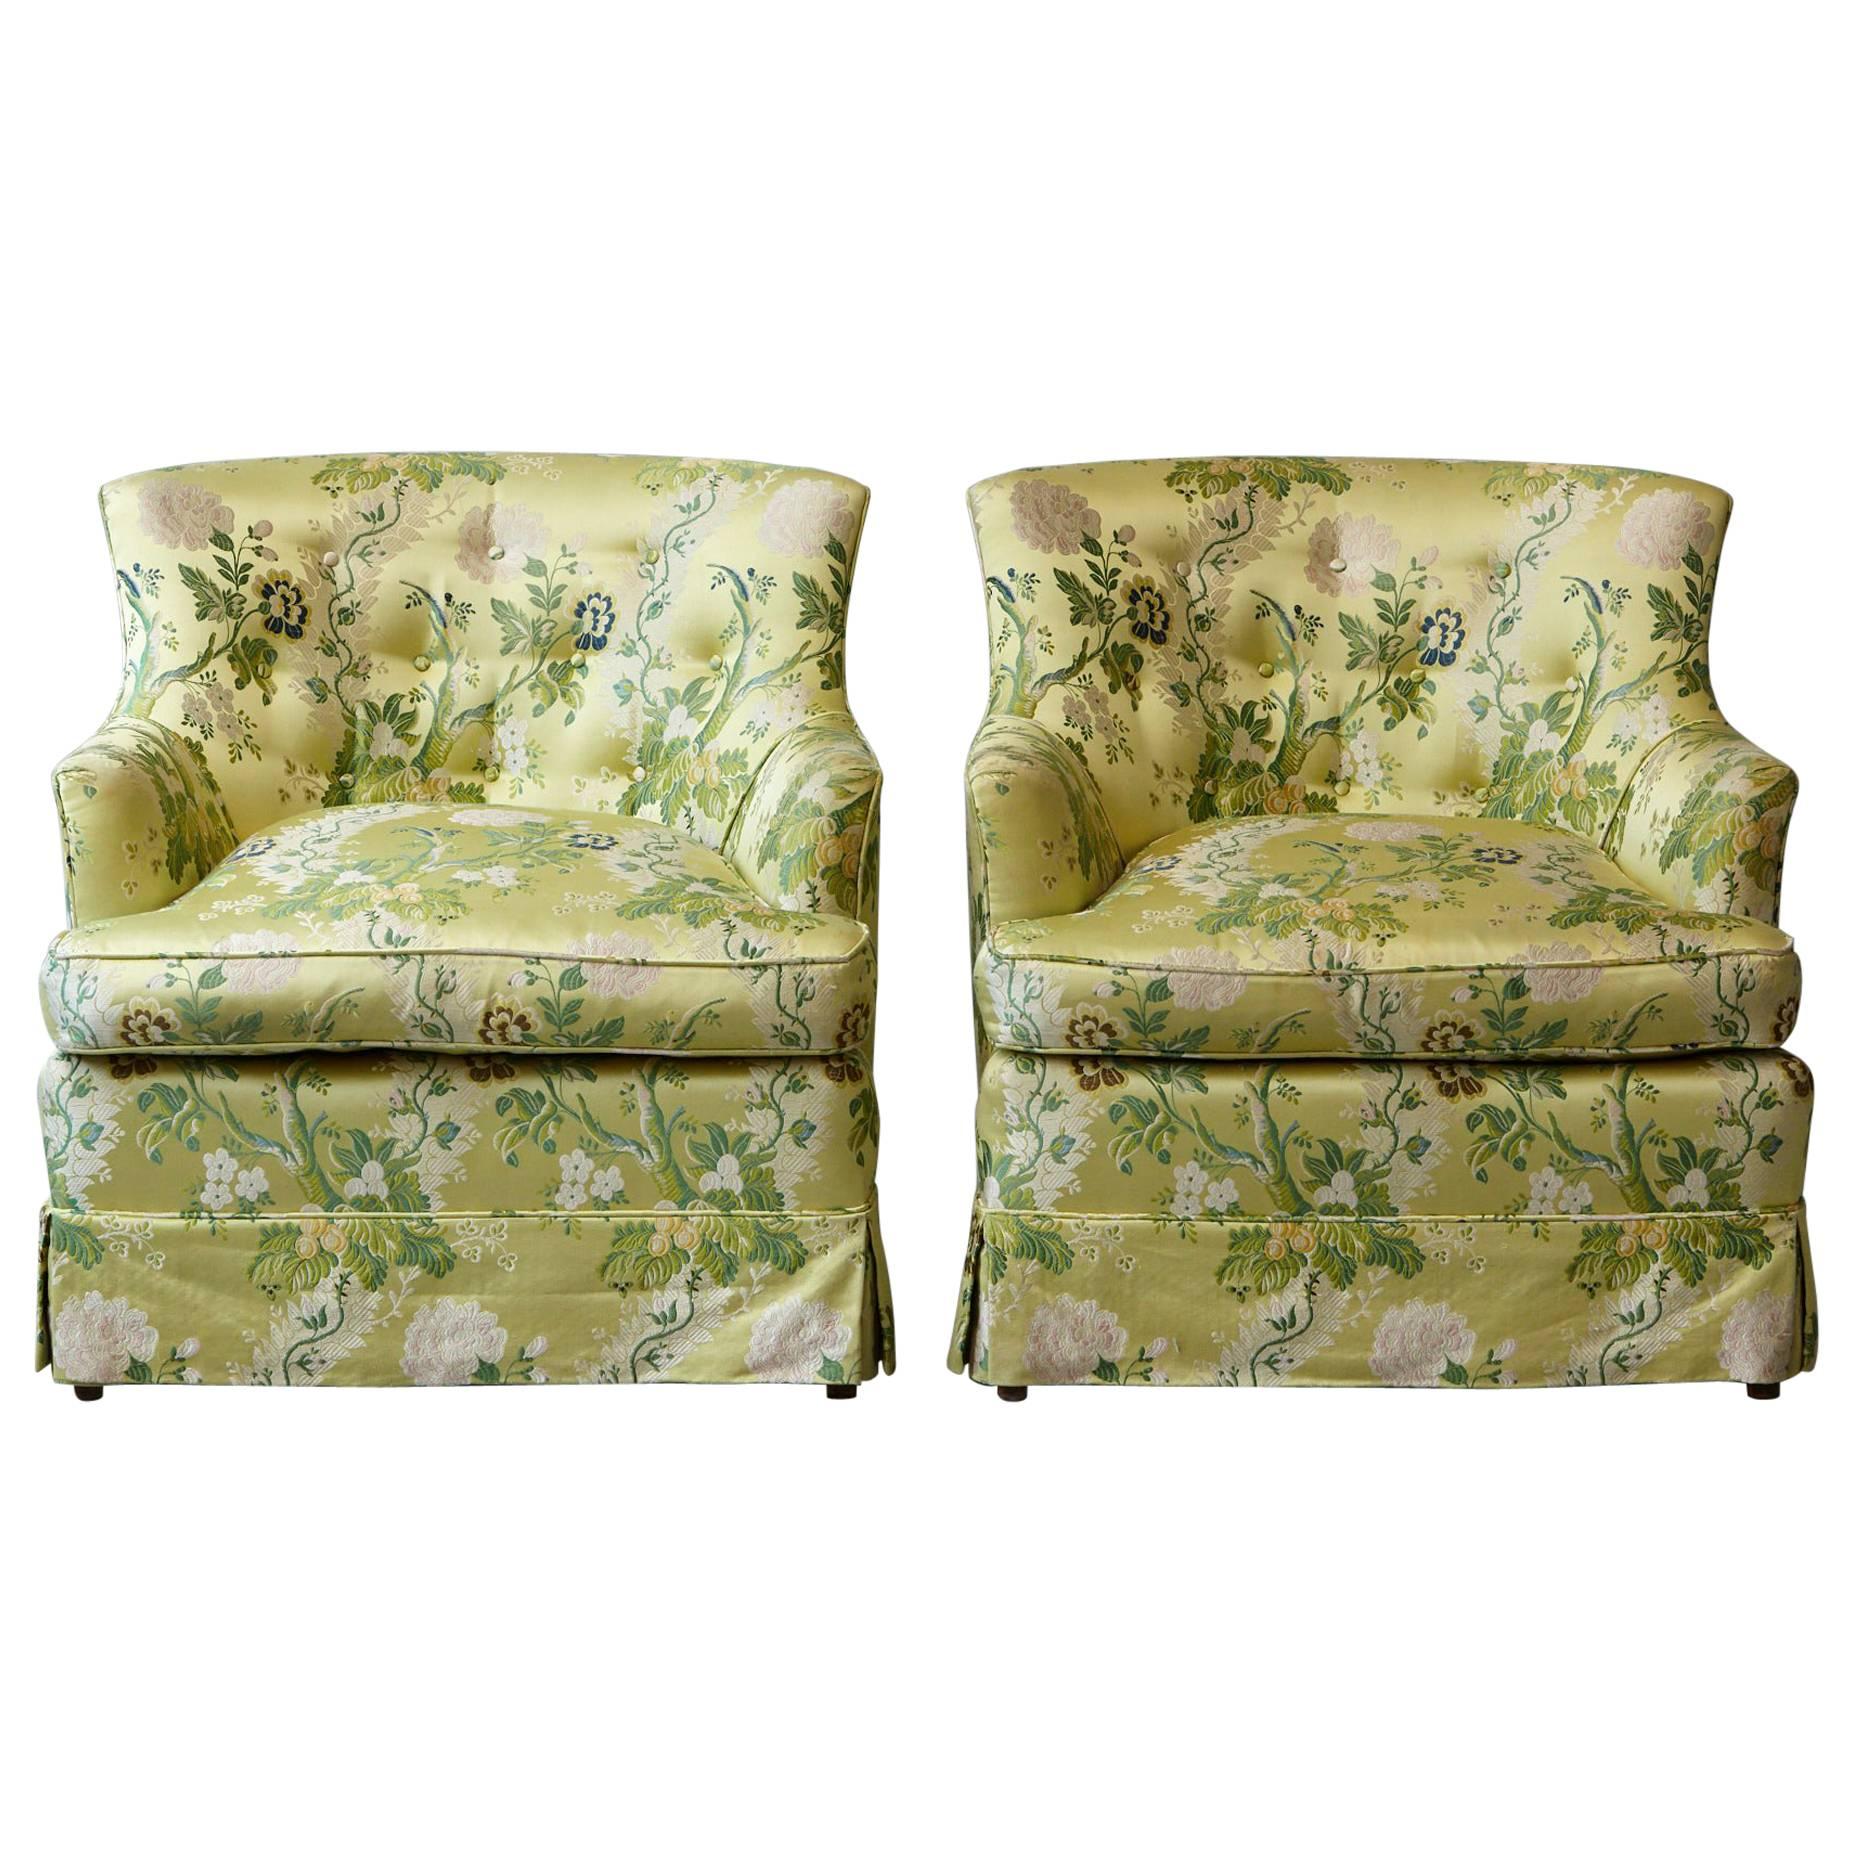 Pair of Lounge Chairs in Lime Green Floral Chintz from ABC For Sale